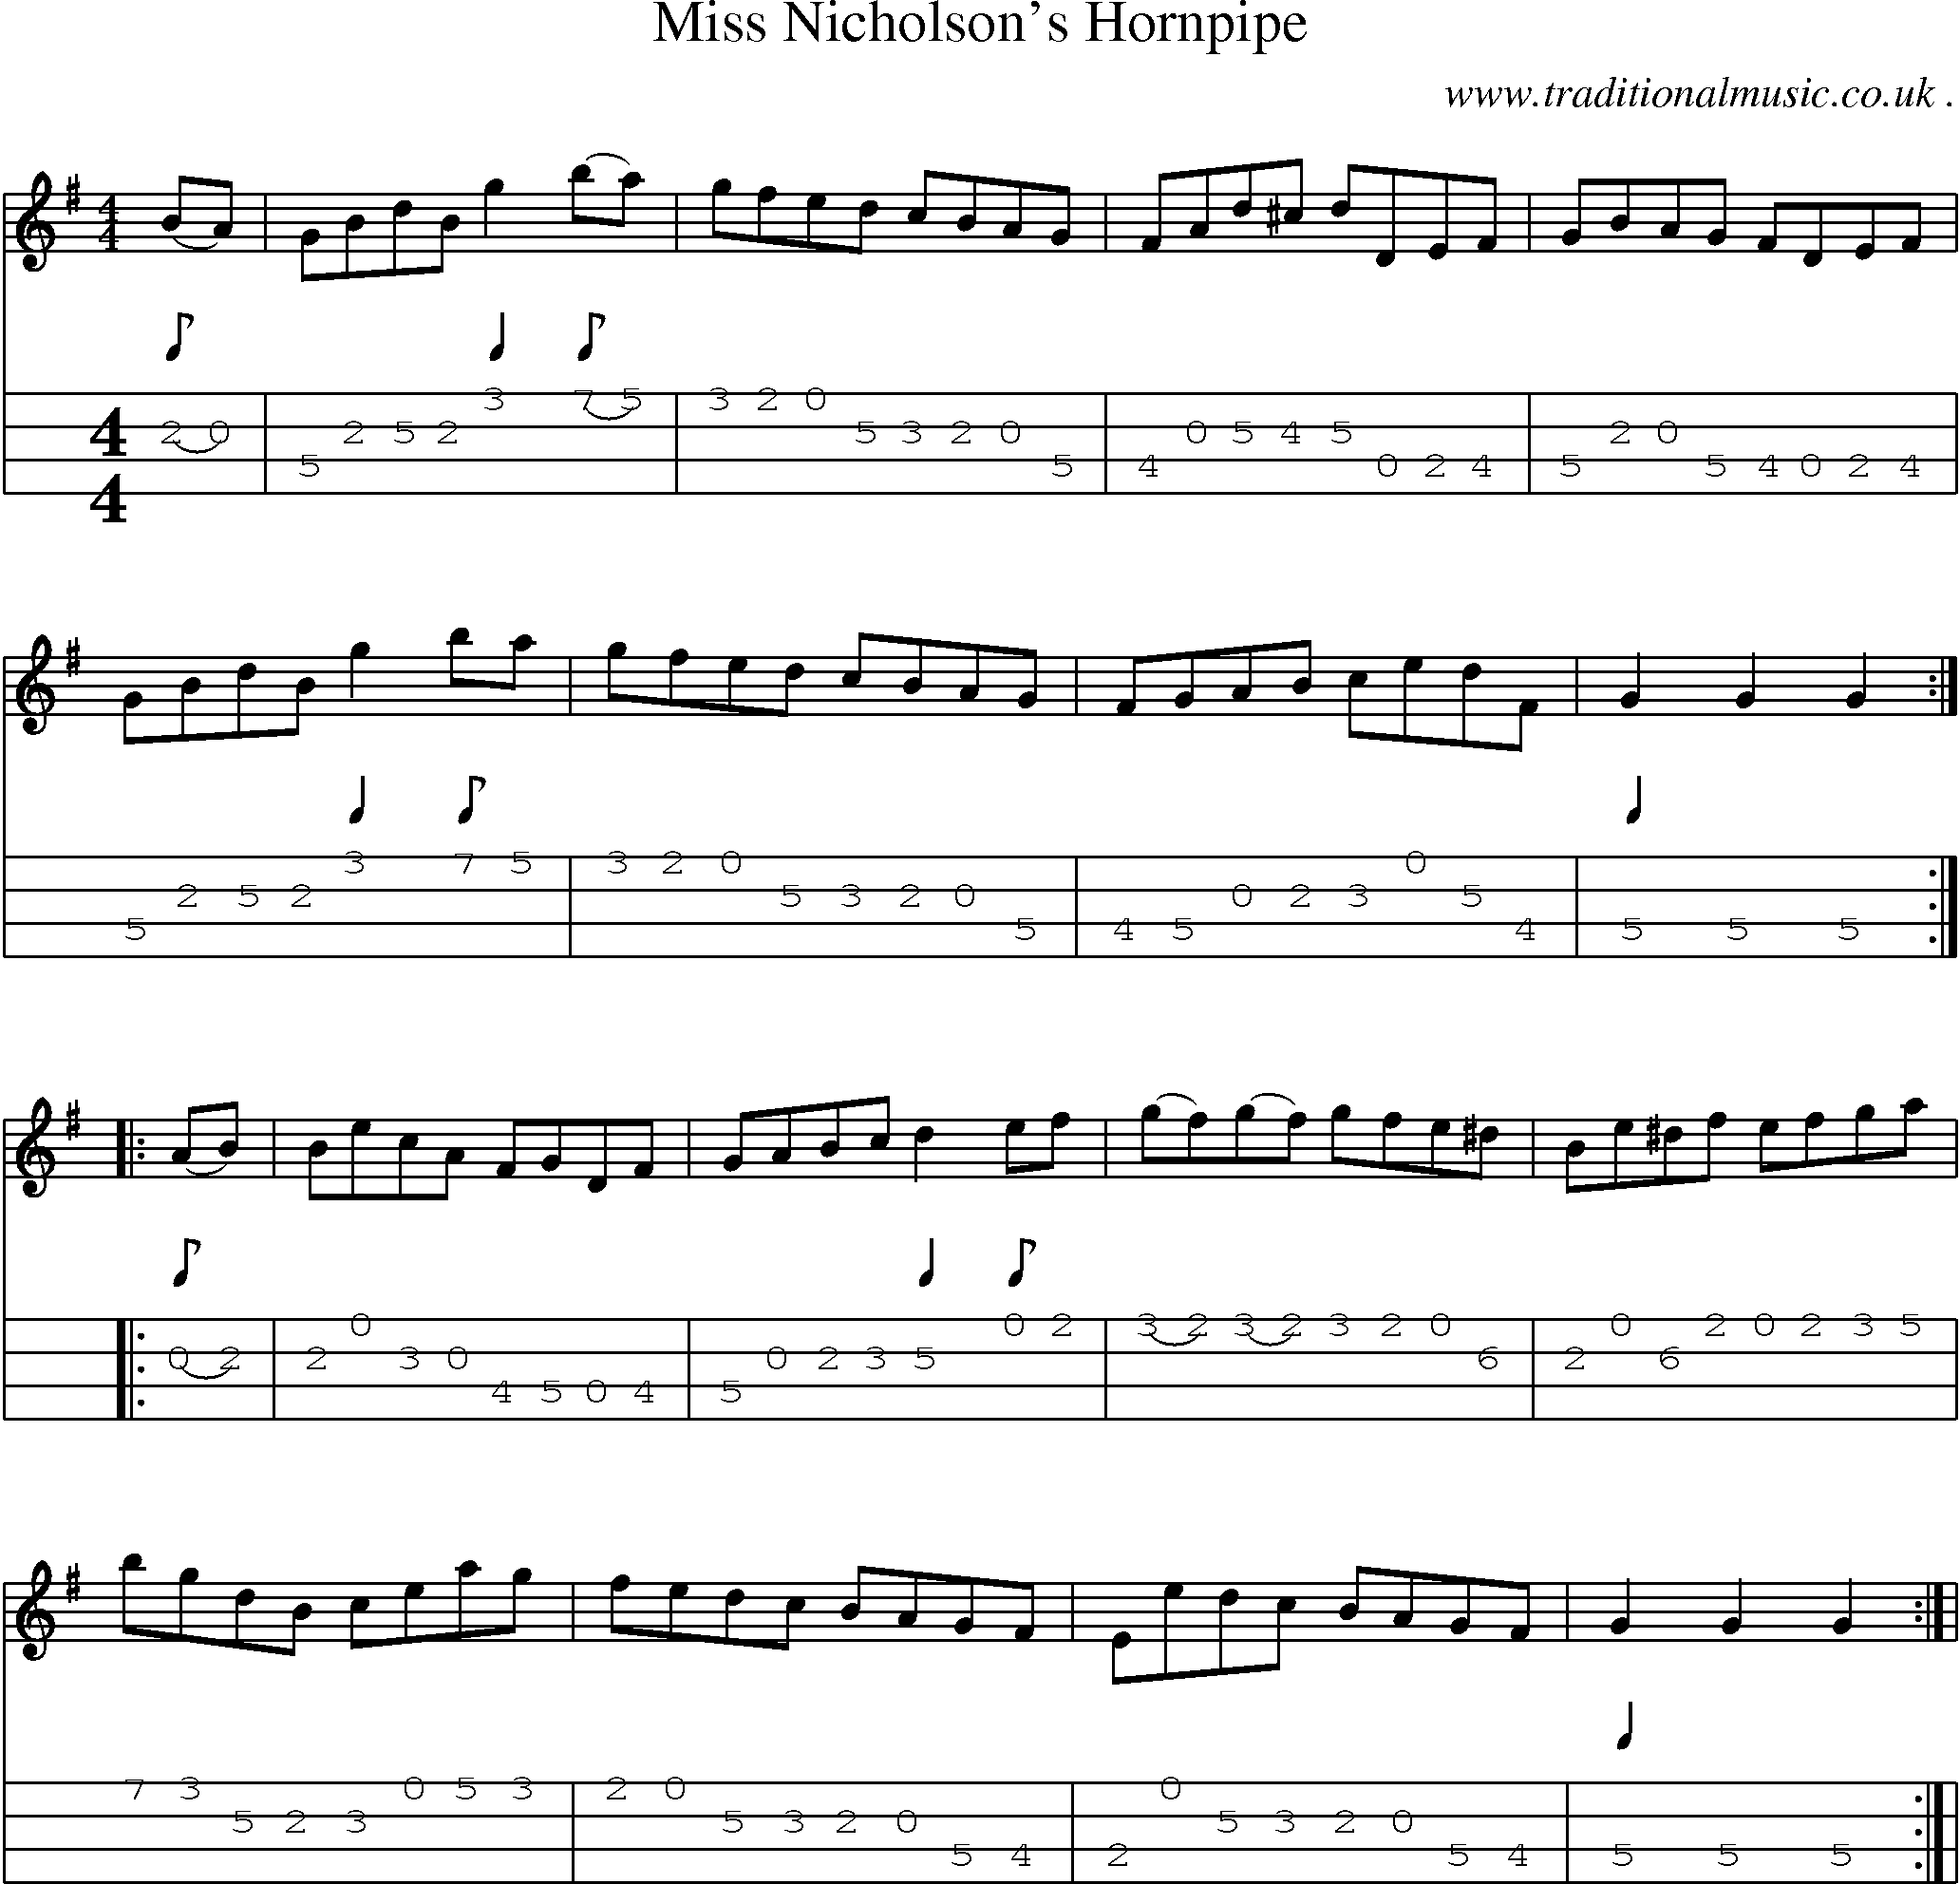 Sheet-Music and Mandolin Tabs for Miss Nicholsons Hornpipe